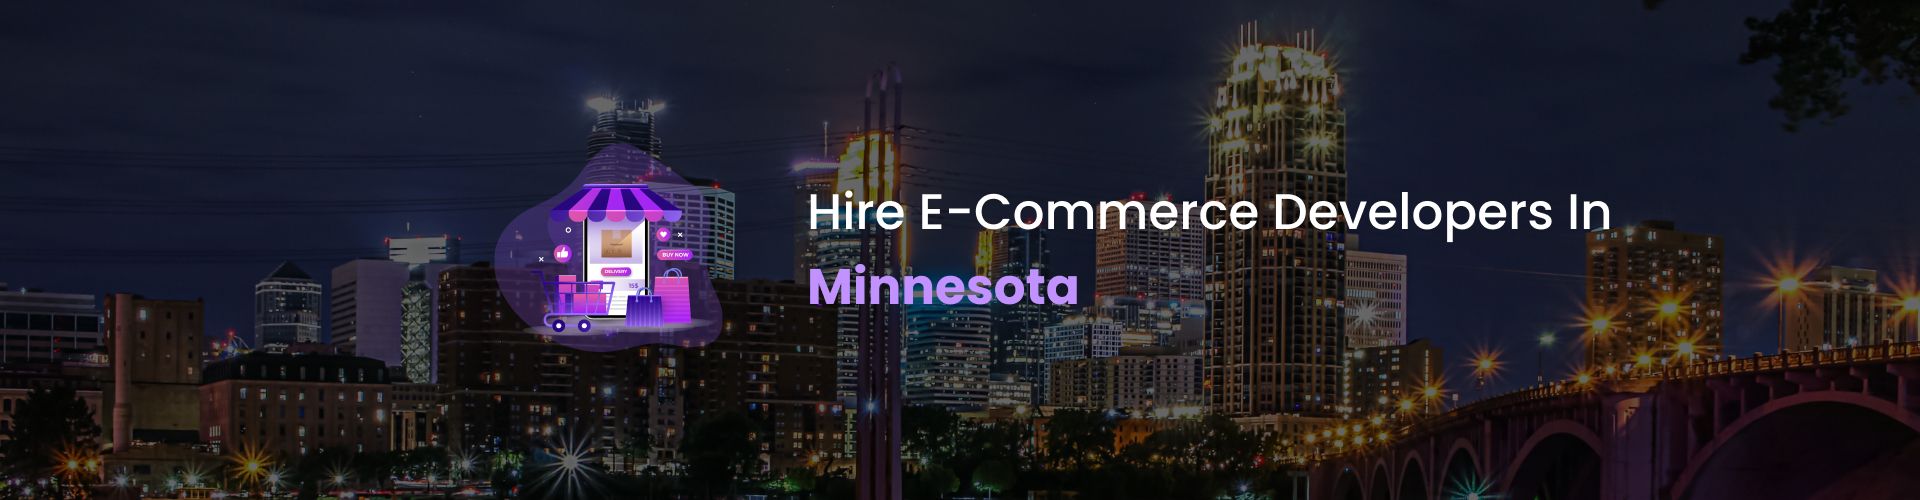 hire ecommerce developers in minnesota